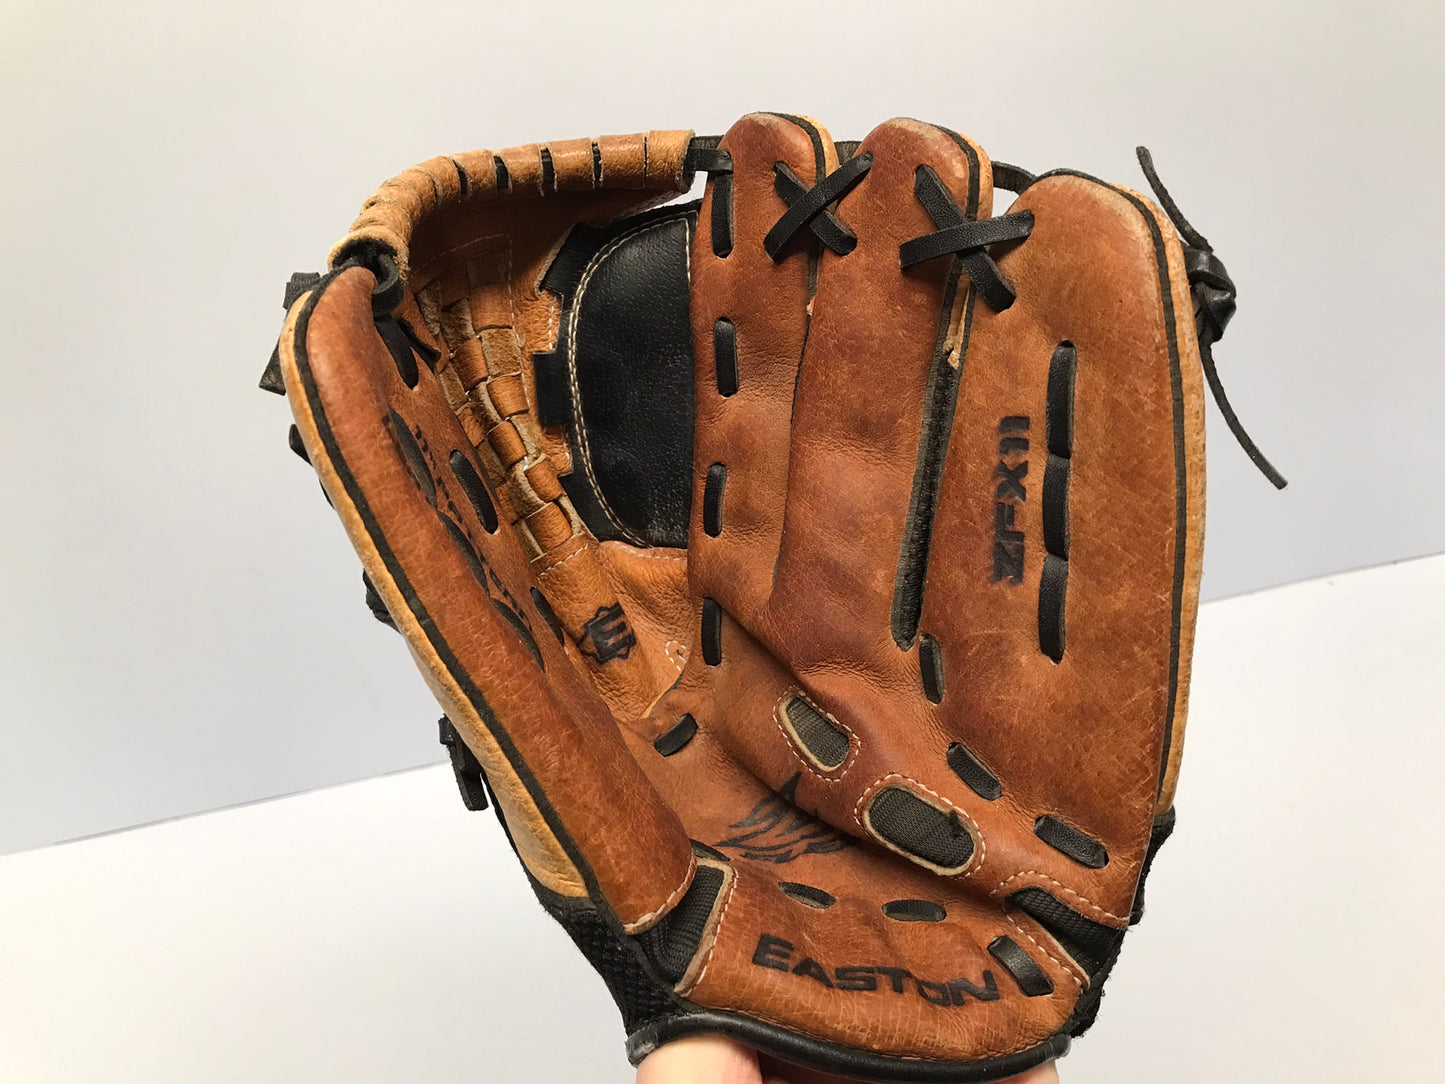 Baseball Glove Adult Size 11 inch  Easton Brown Black Soft Leather Fits on Left Hand